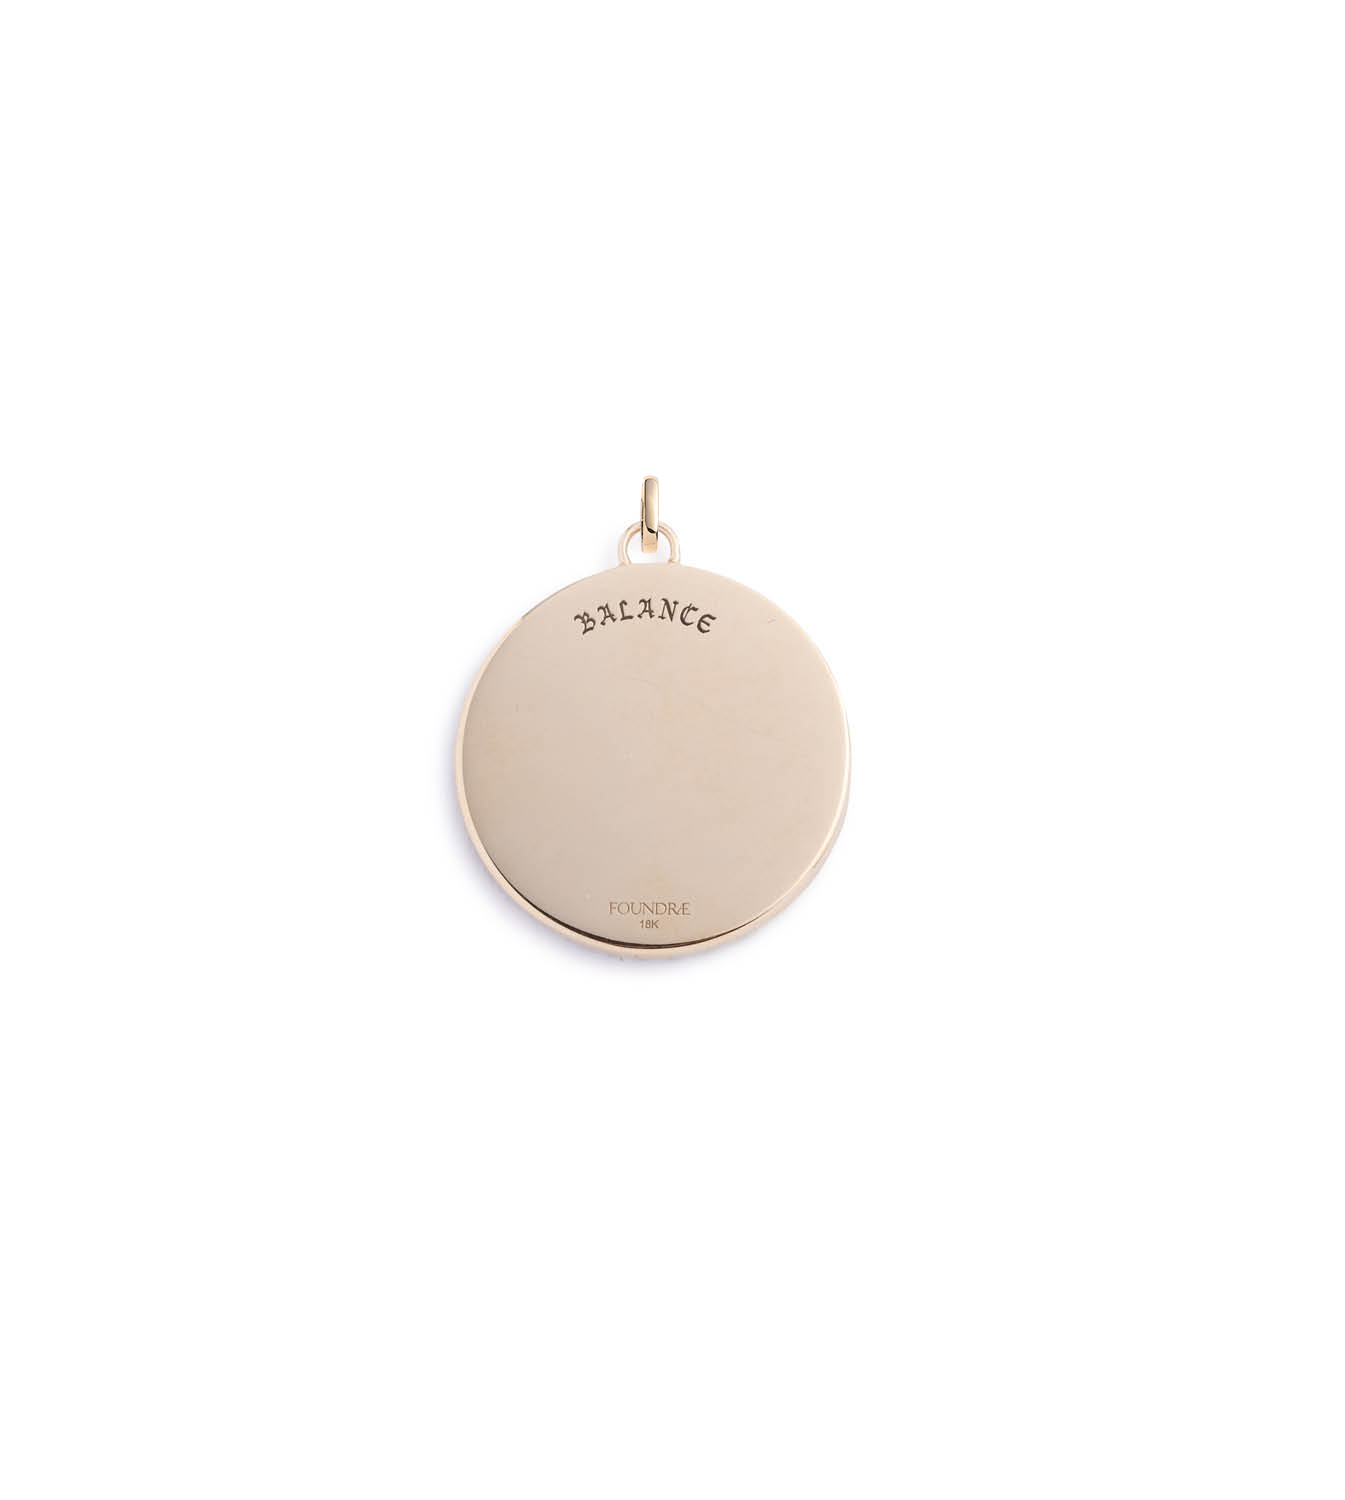 Balance : Large Specialty Medallion with Oval Pushgate